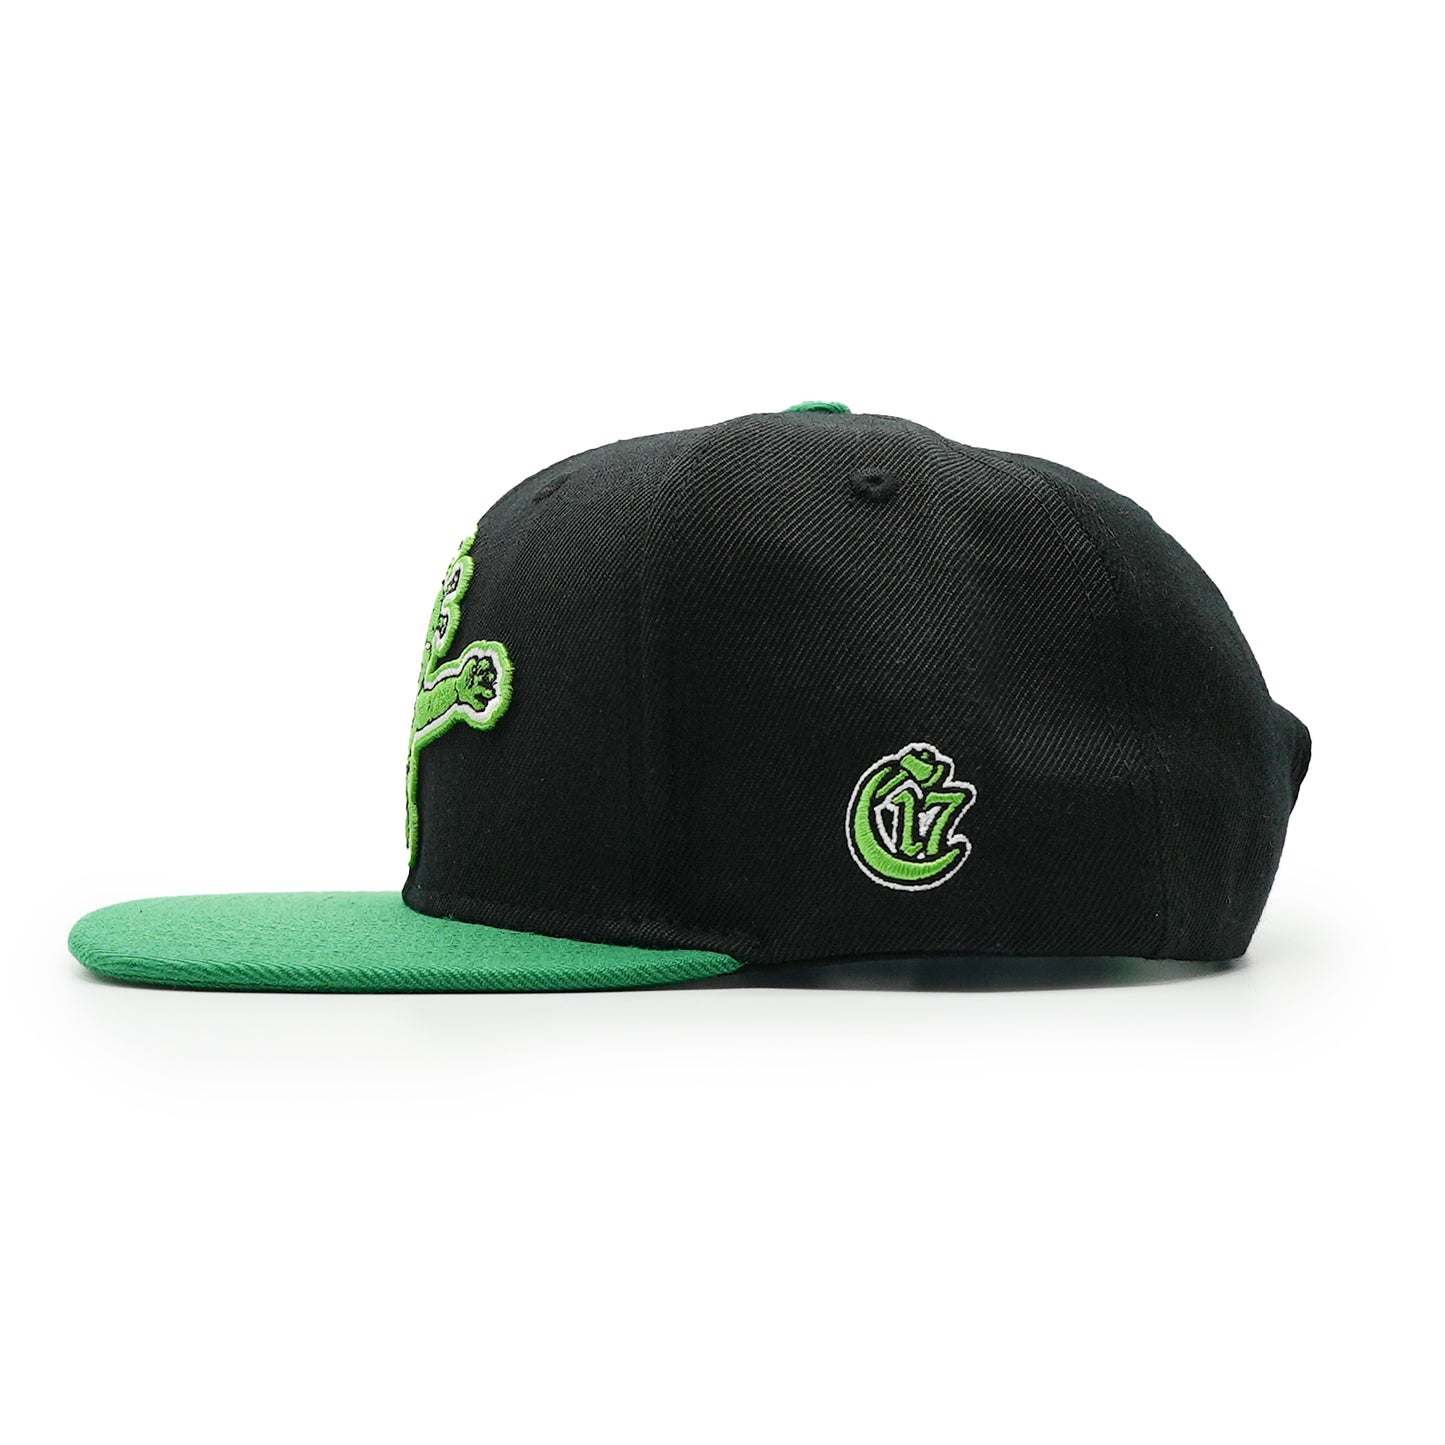 Elements Snapback - Gutterwater - Black and Green